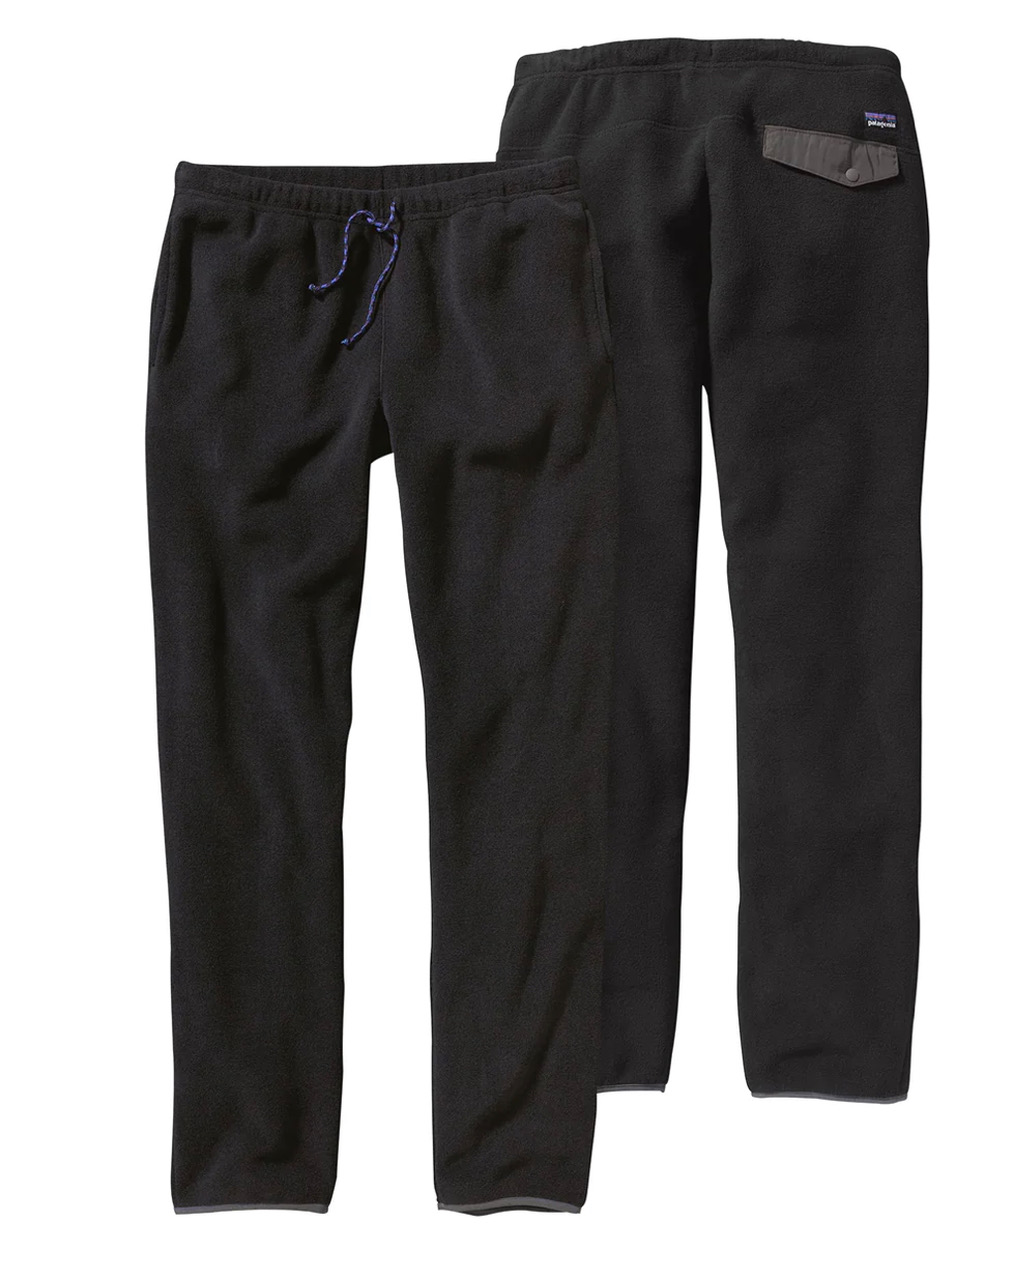 Patagonia M's Synchilla Snap-T Pant - Black w/ Forge Grey - Large